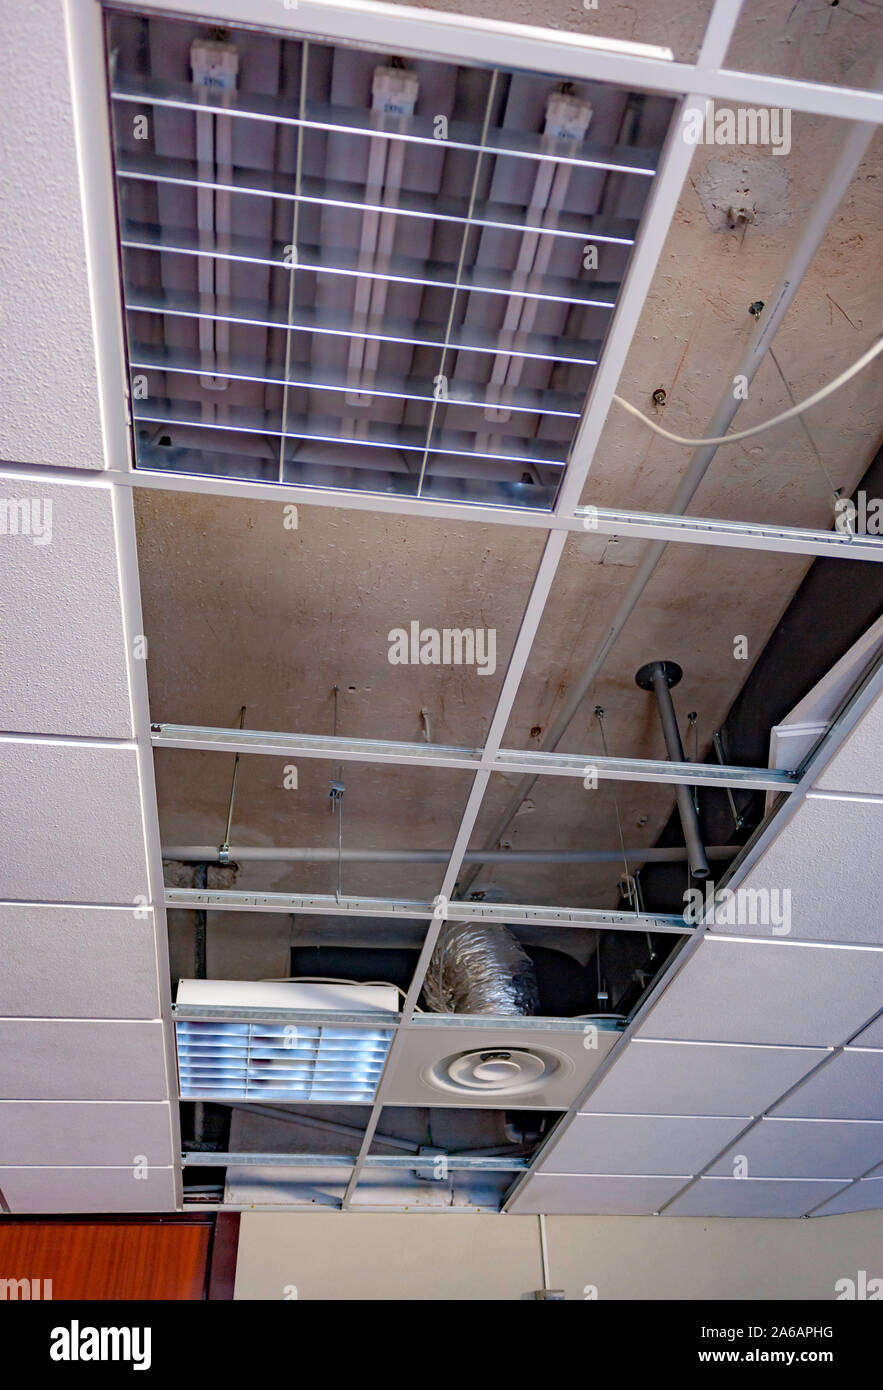 repairing board ceiling with gypsum. In the classroom Stock Photo